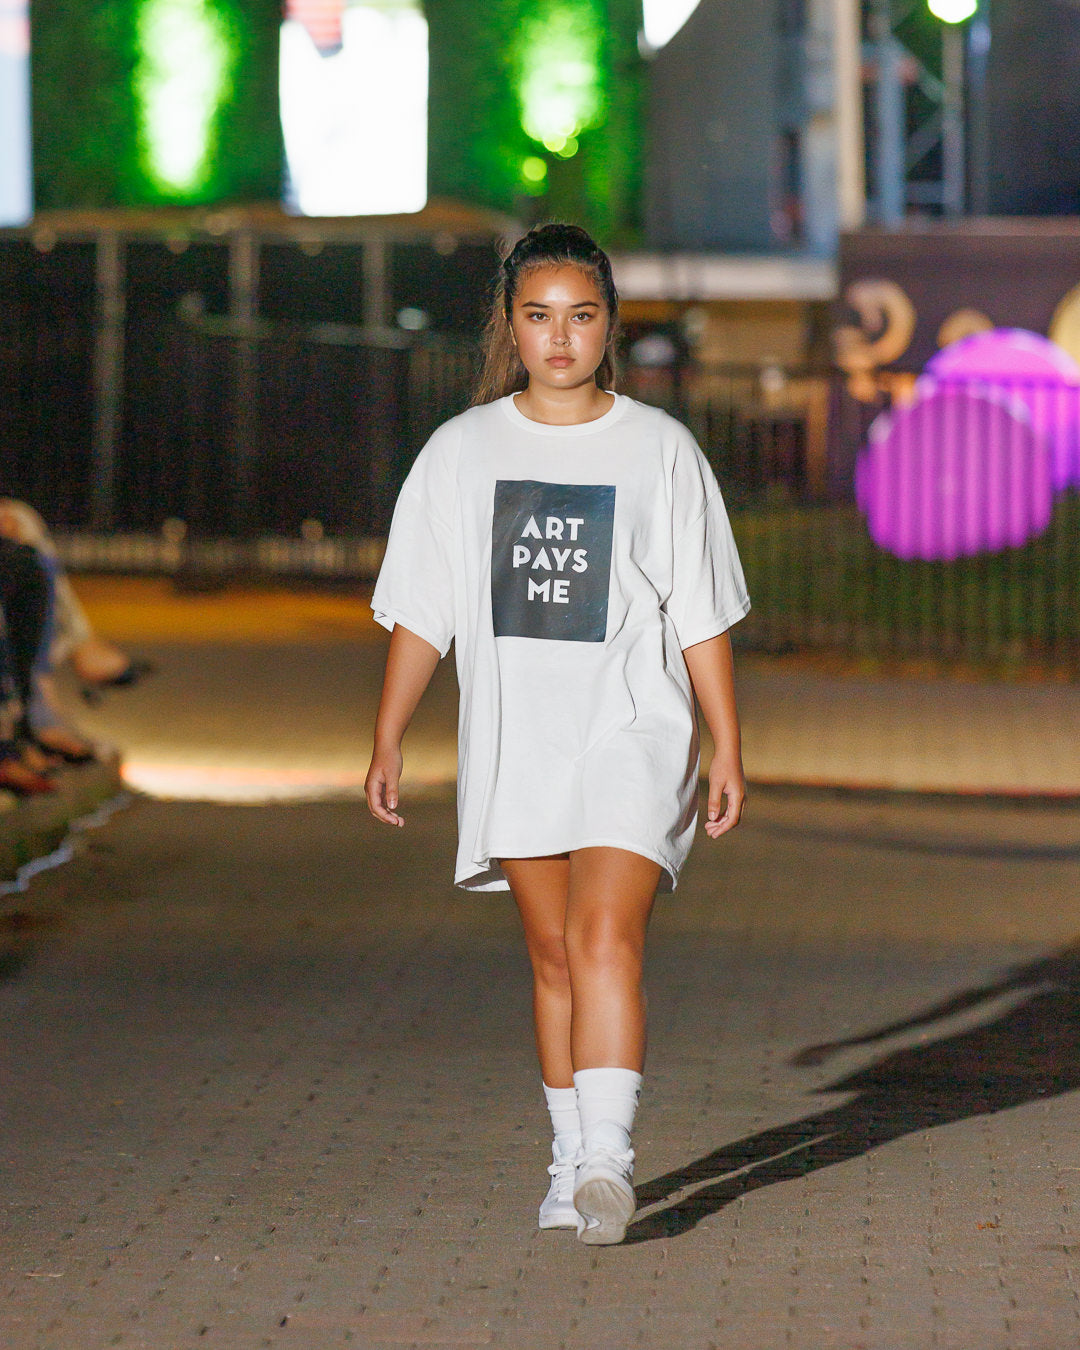 Girl wearing a white t-shirt with Art Pays Me printed on it